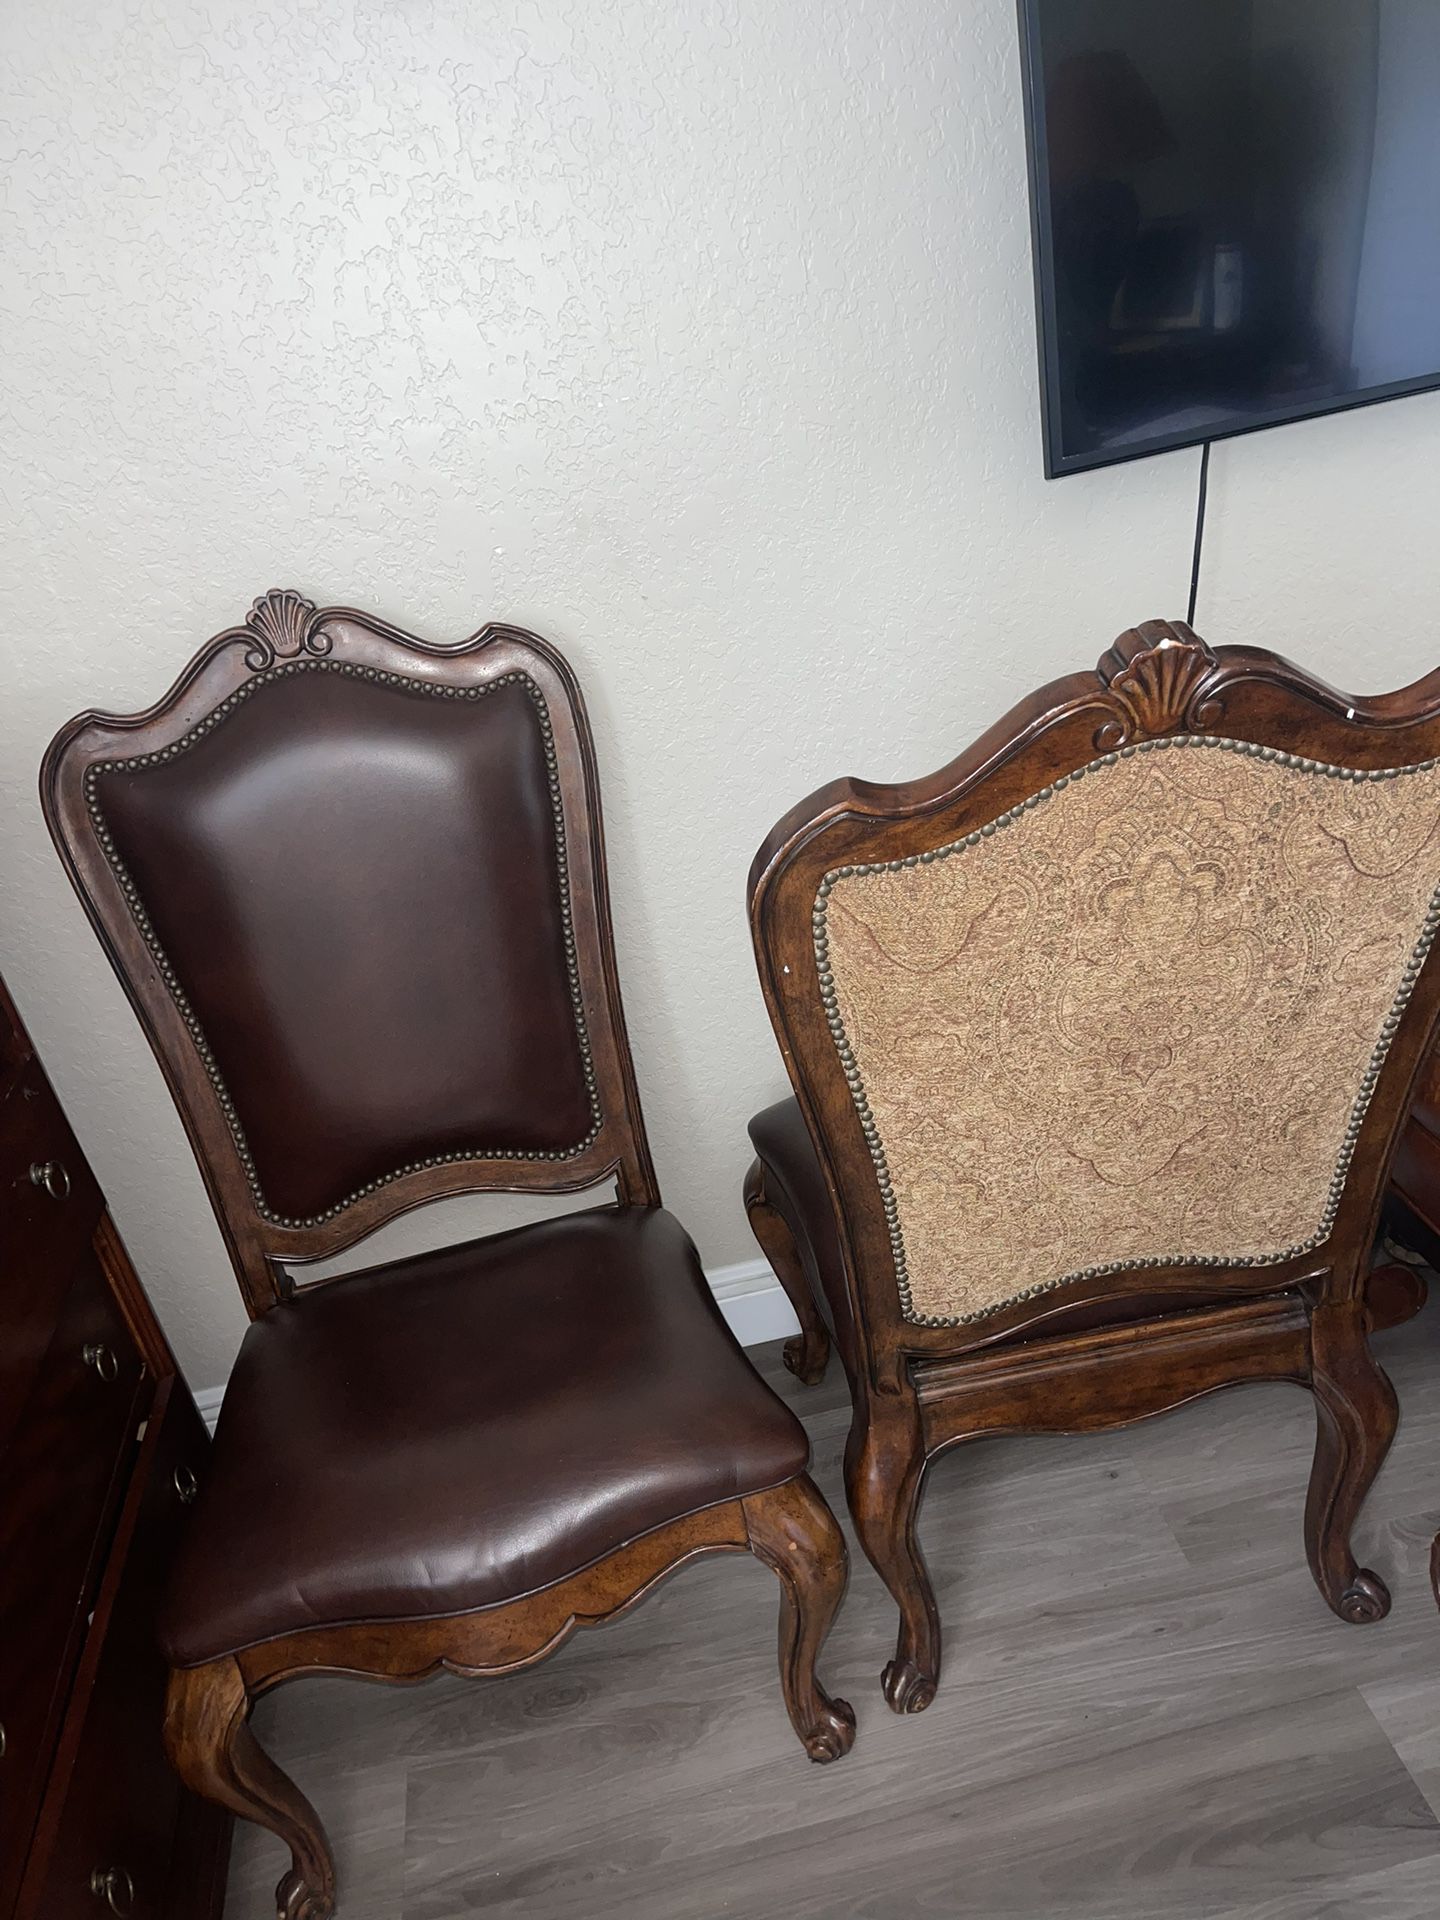 Two Chair 